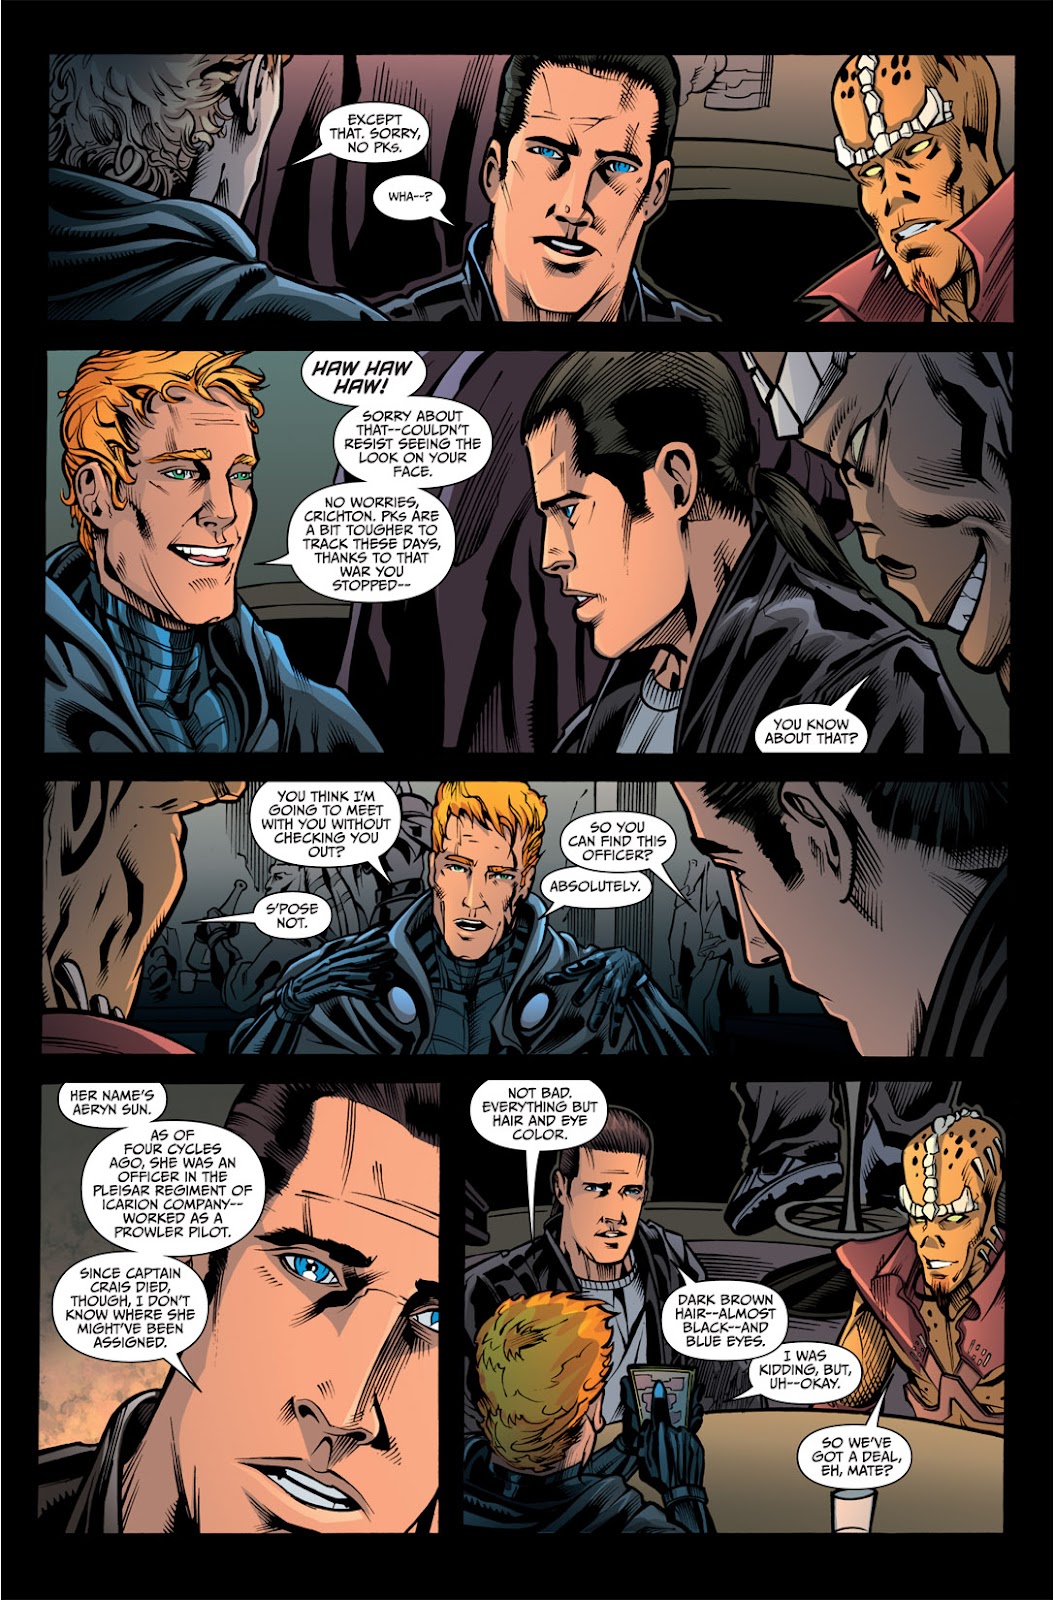 Farscape: Gone and Back issue 3 - Page 6